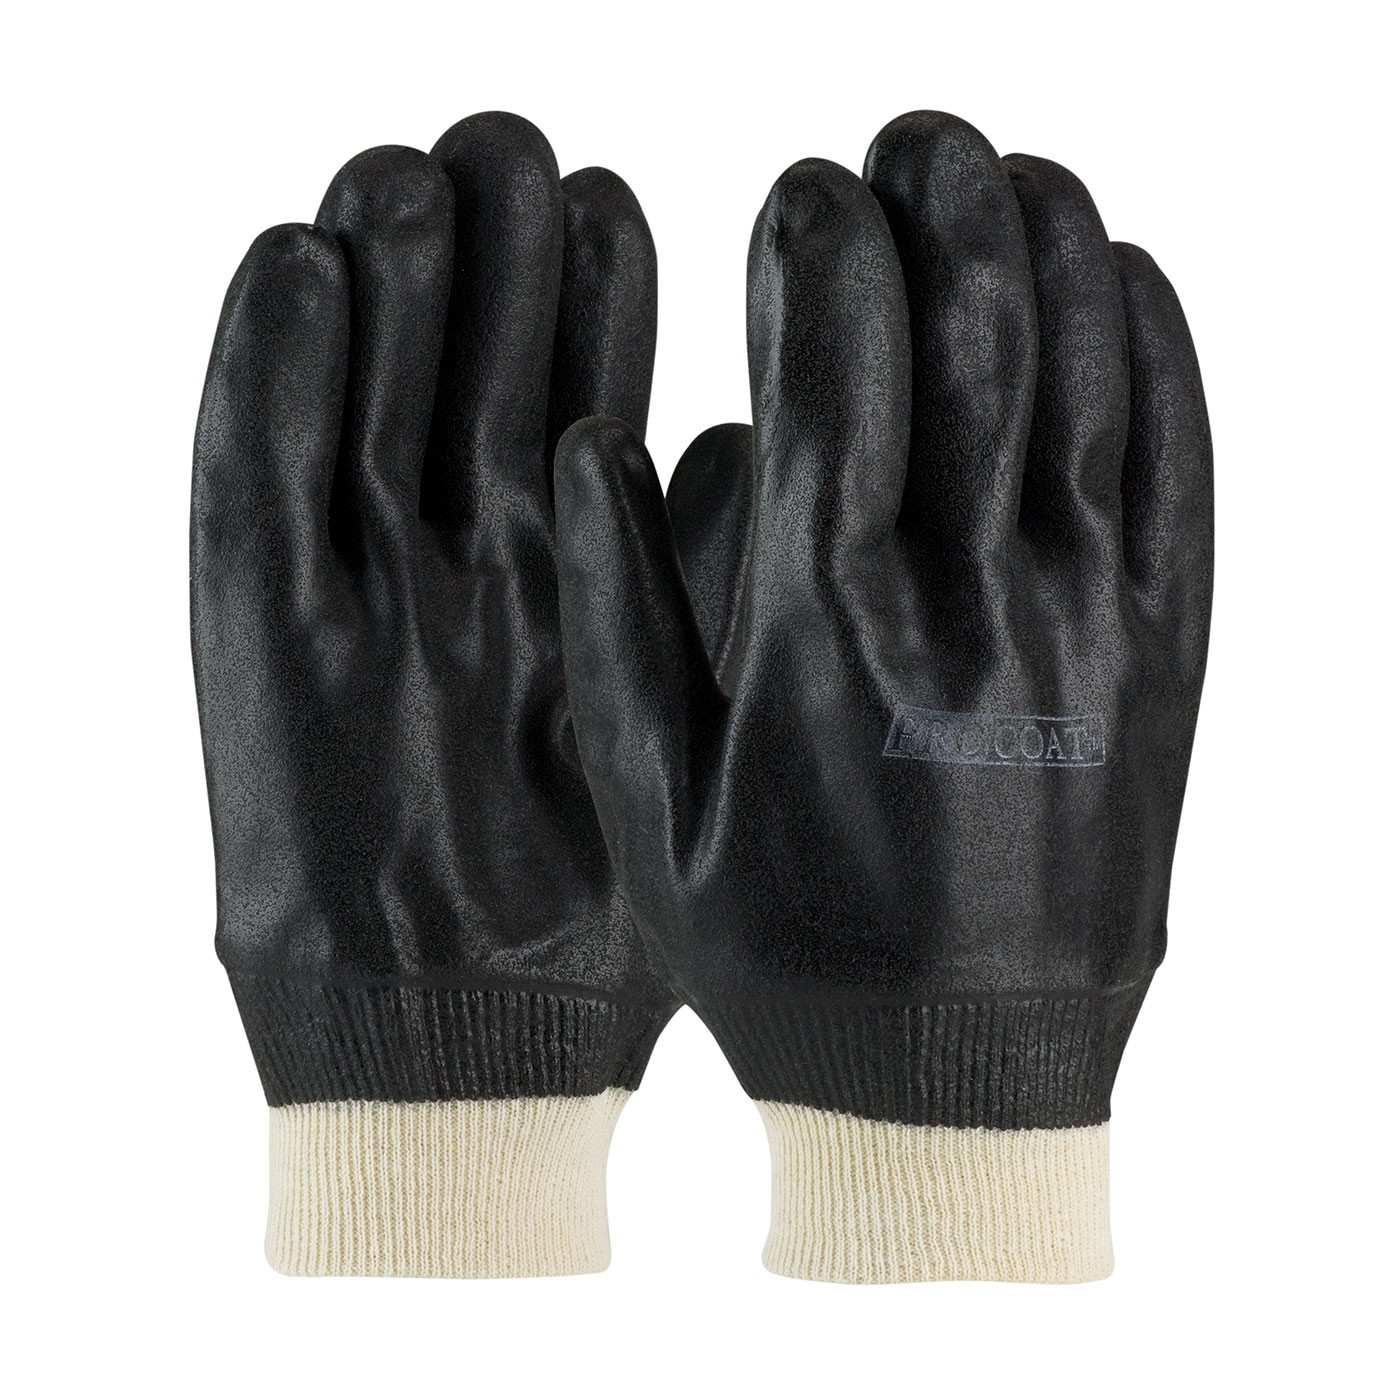 ProCoat® PVC Dipped Glove with Interlock Liner and Sandy Finish - Knitwrist  (#58-8115DD)